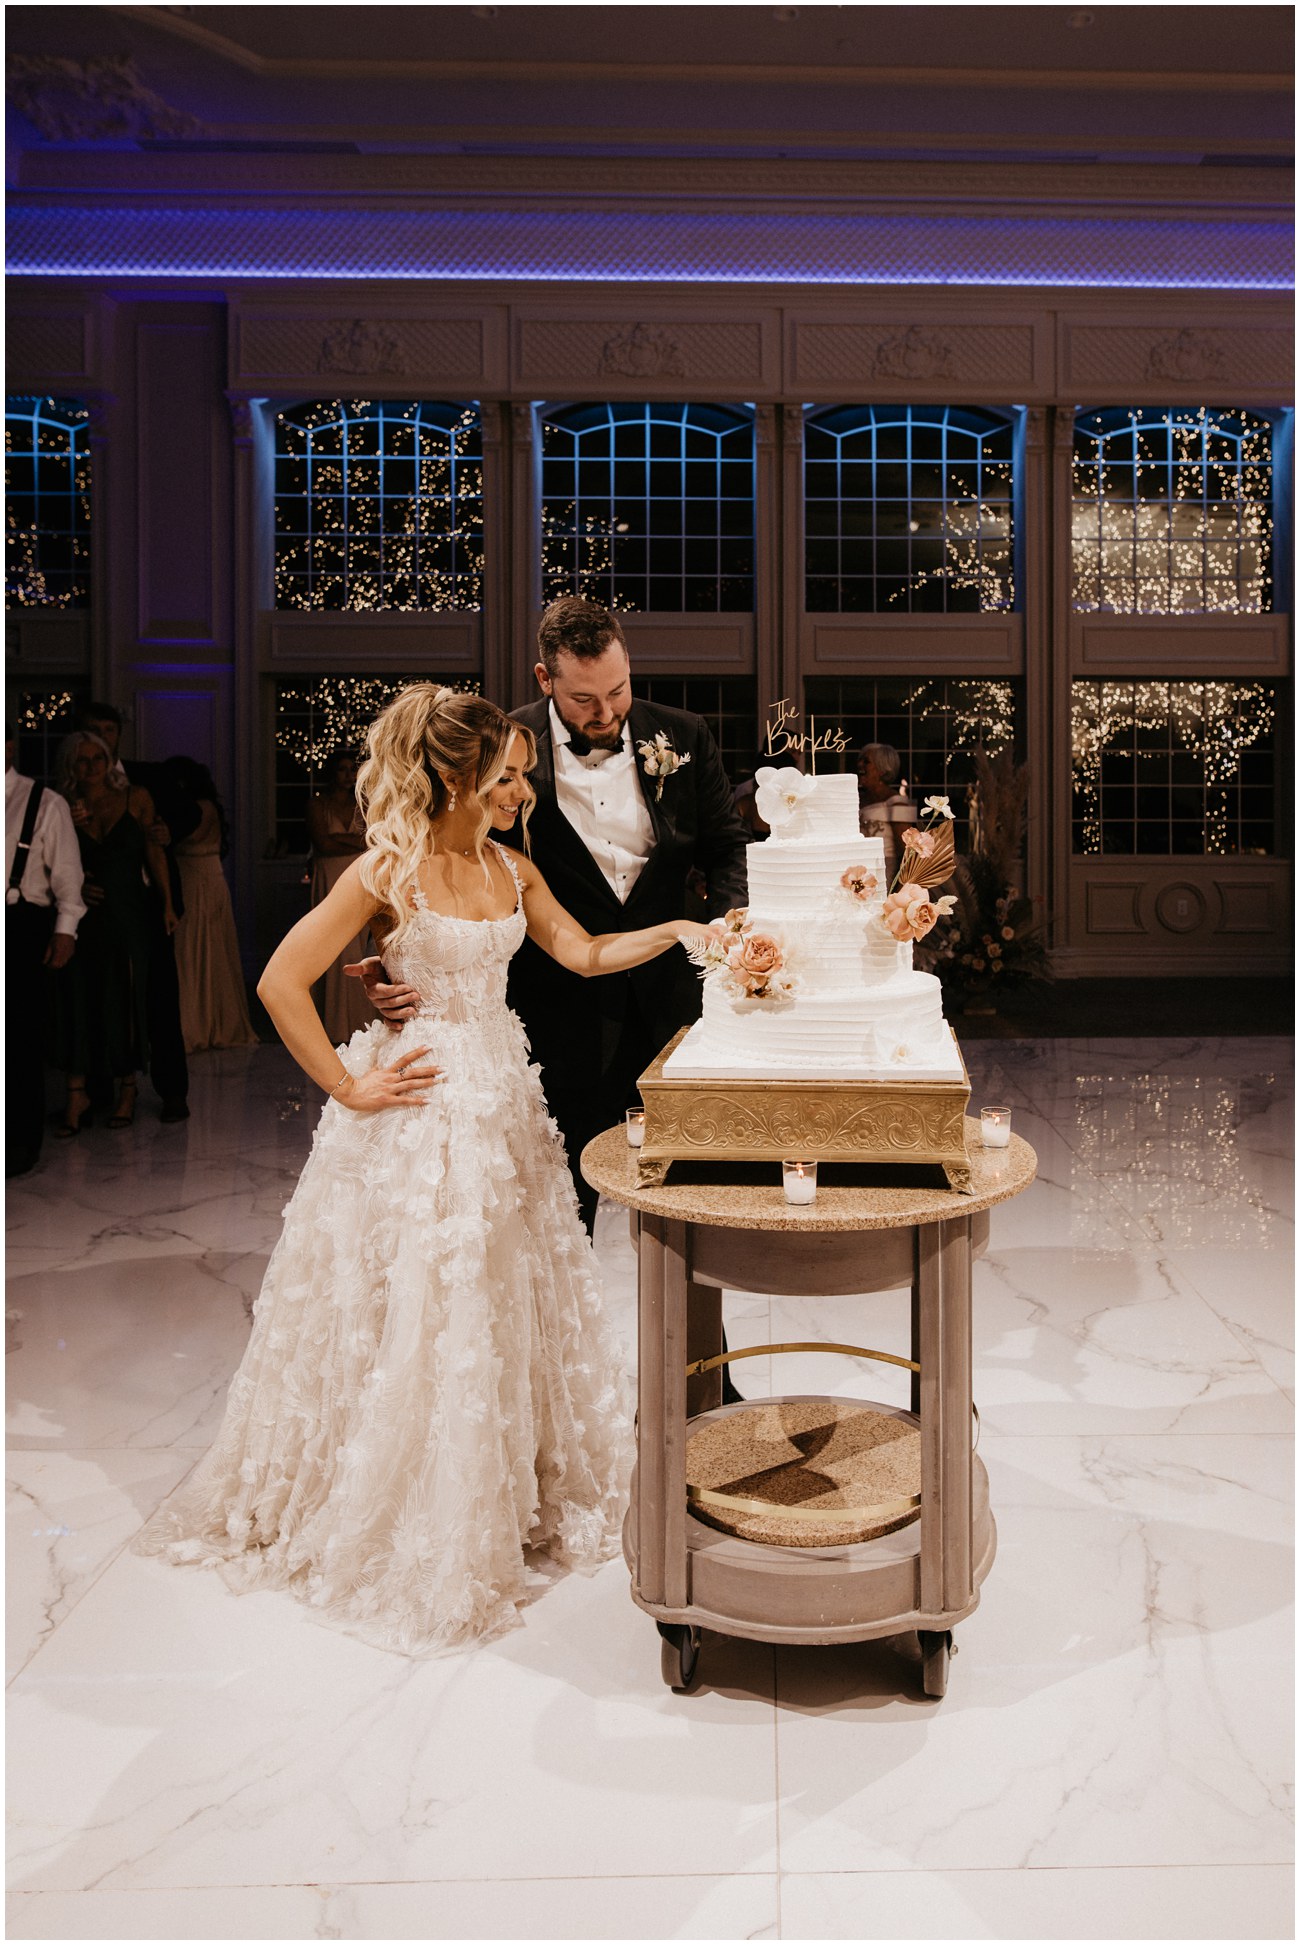 bride and groom cut cake during wedding reception at florentine gardens in new jersey